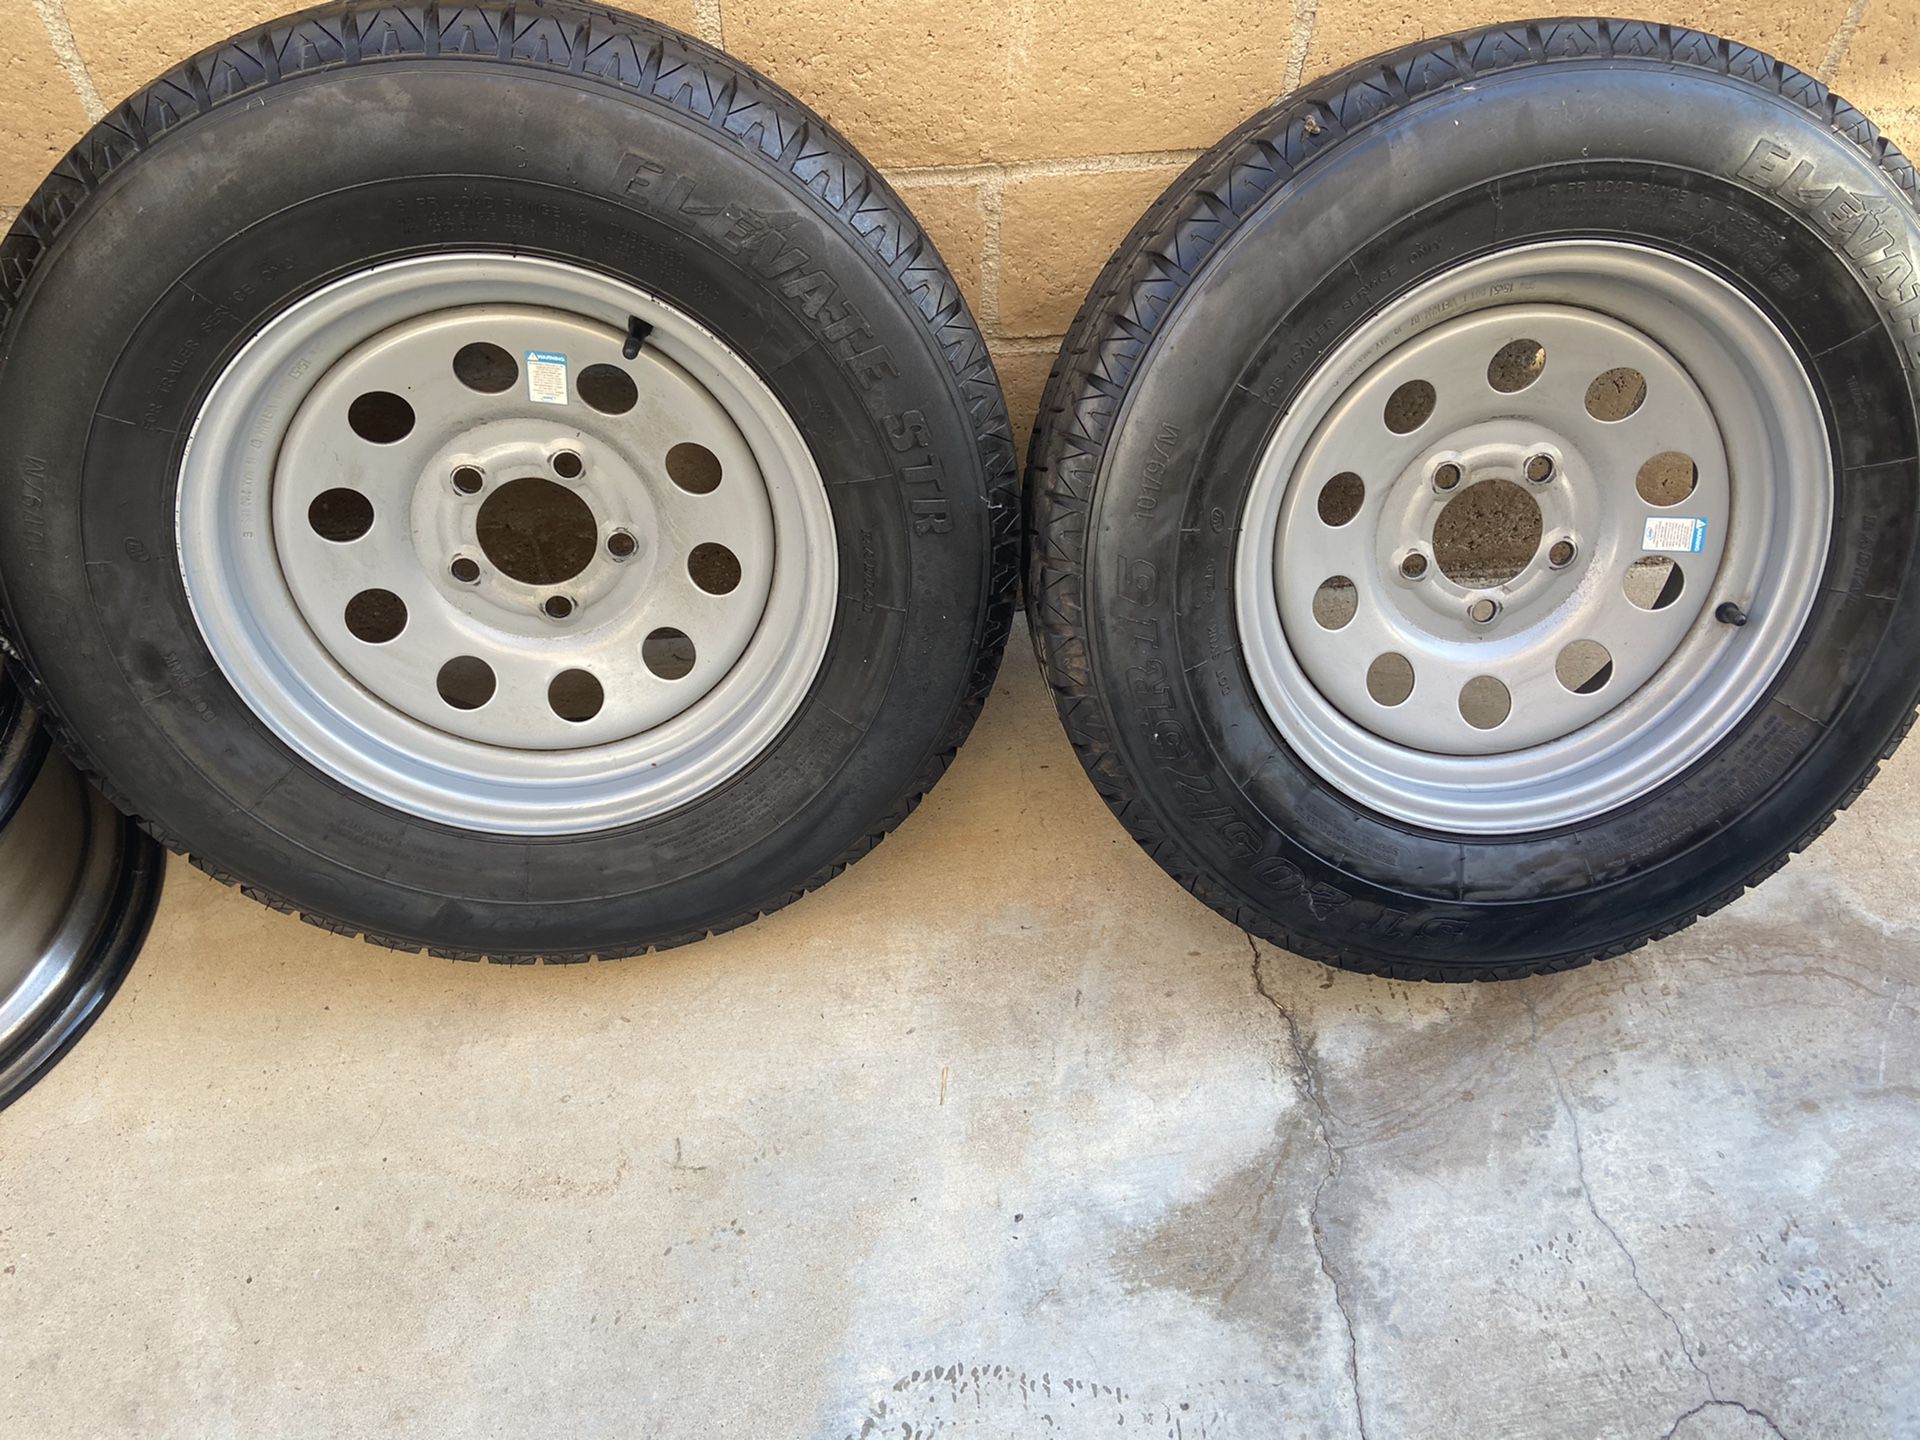 205/75R 15 off a hallmark cargo 20’ trailer one trip to the desert like new lugs wheels and 5 tires $500 obo